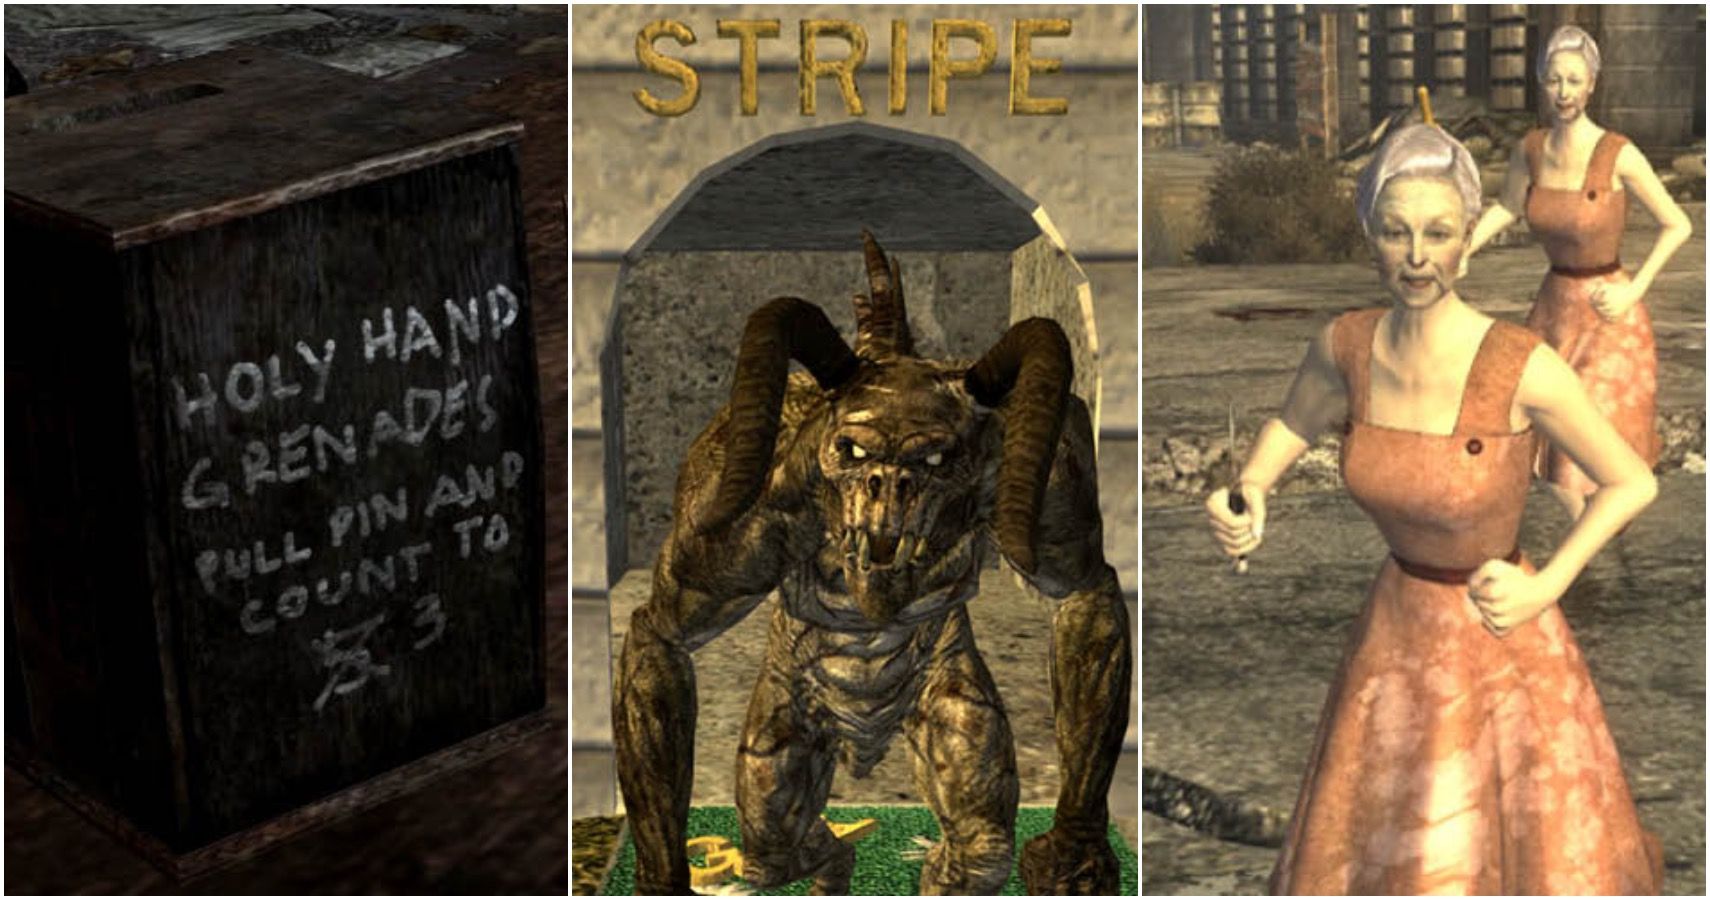 perks in fallout new vegas